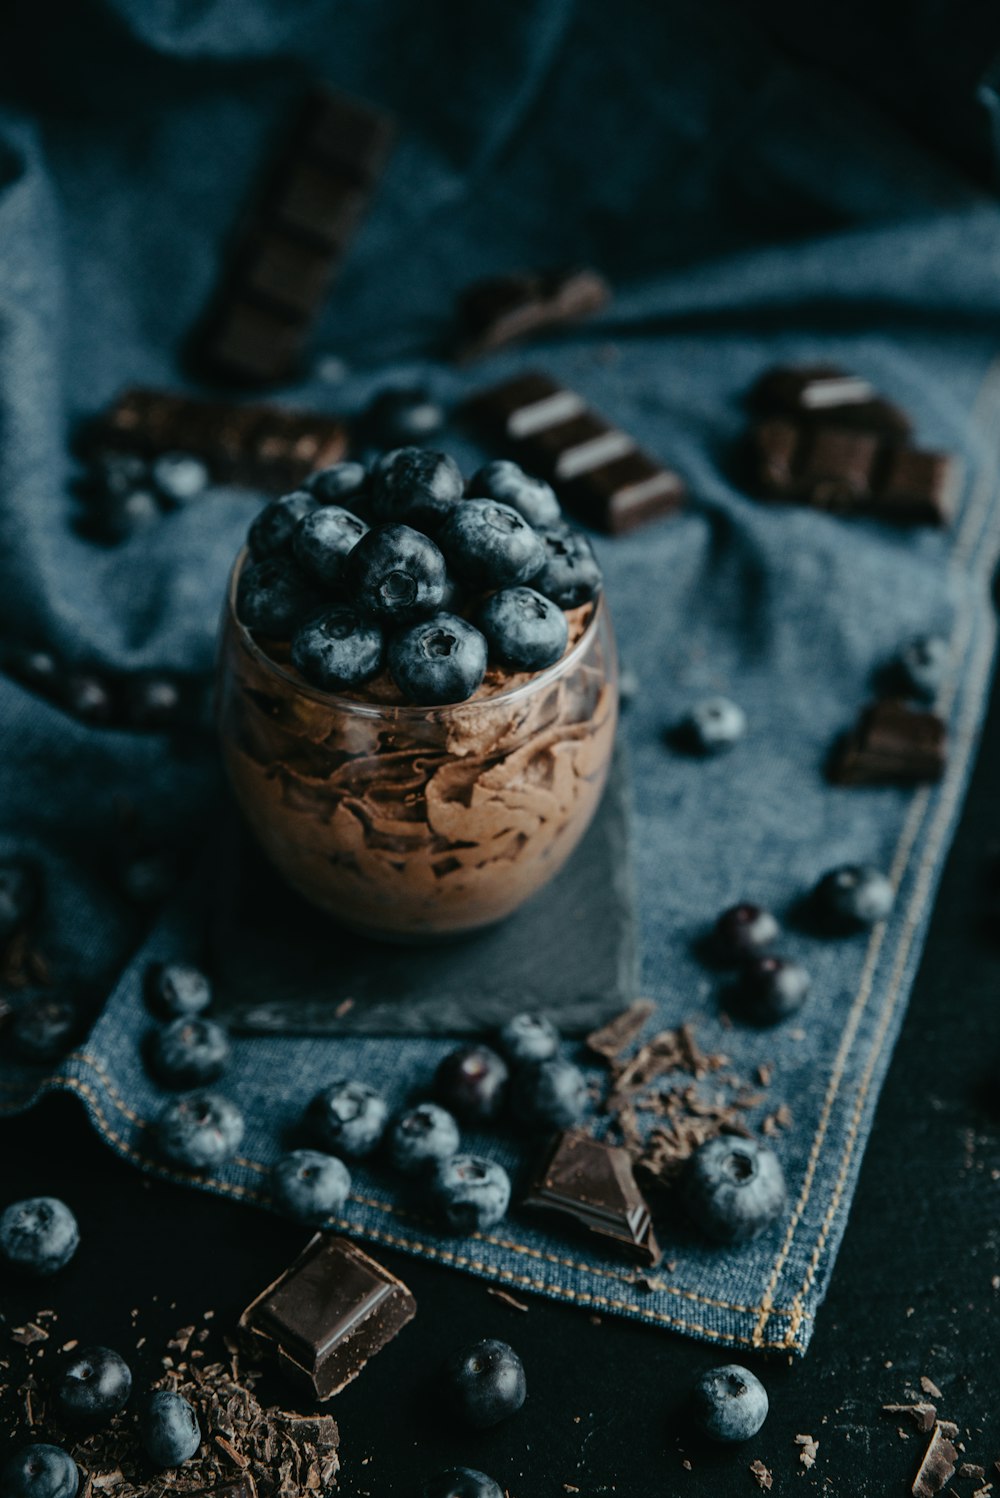 a glass jar filled with chocolate and blueberries